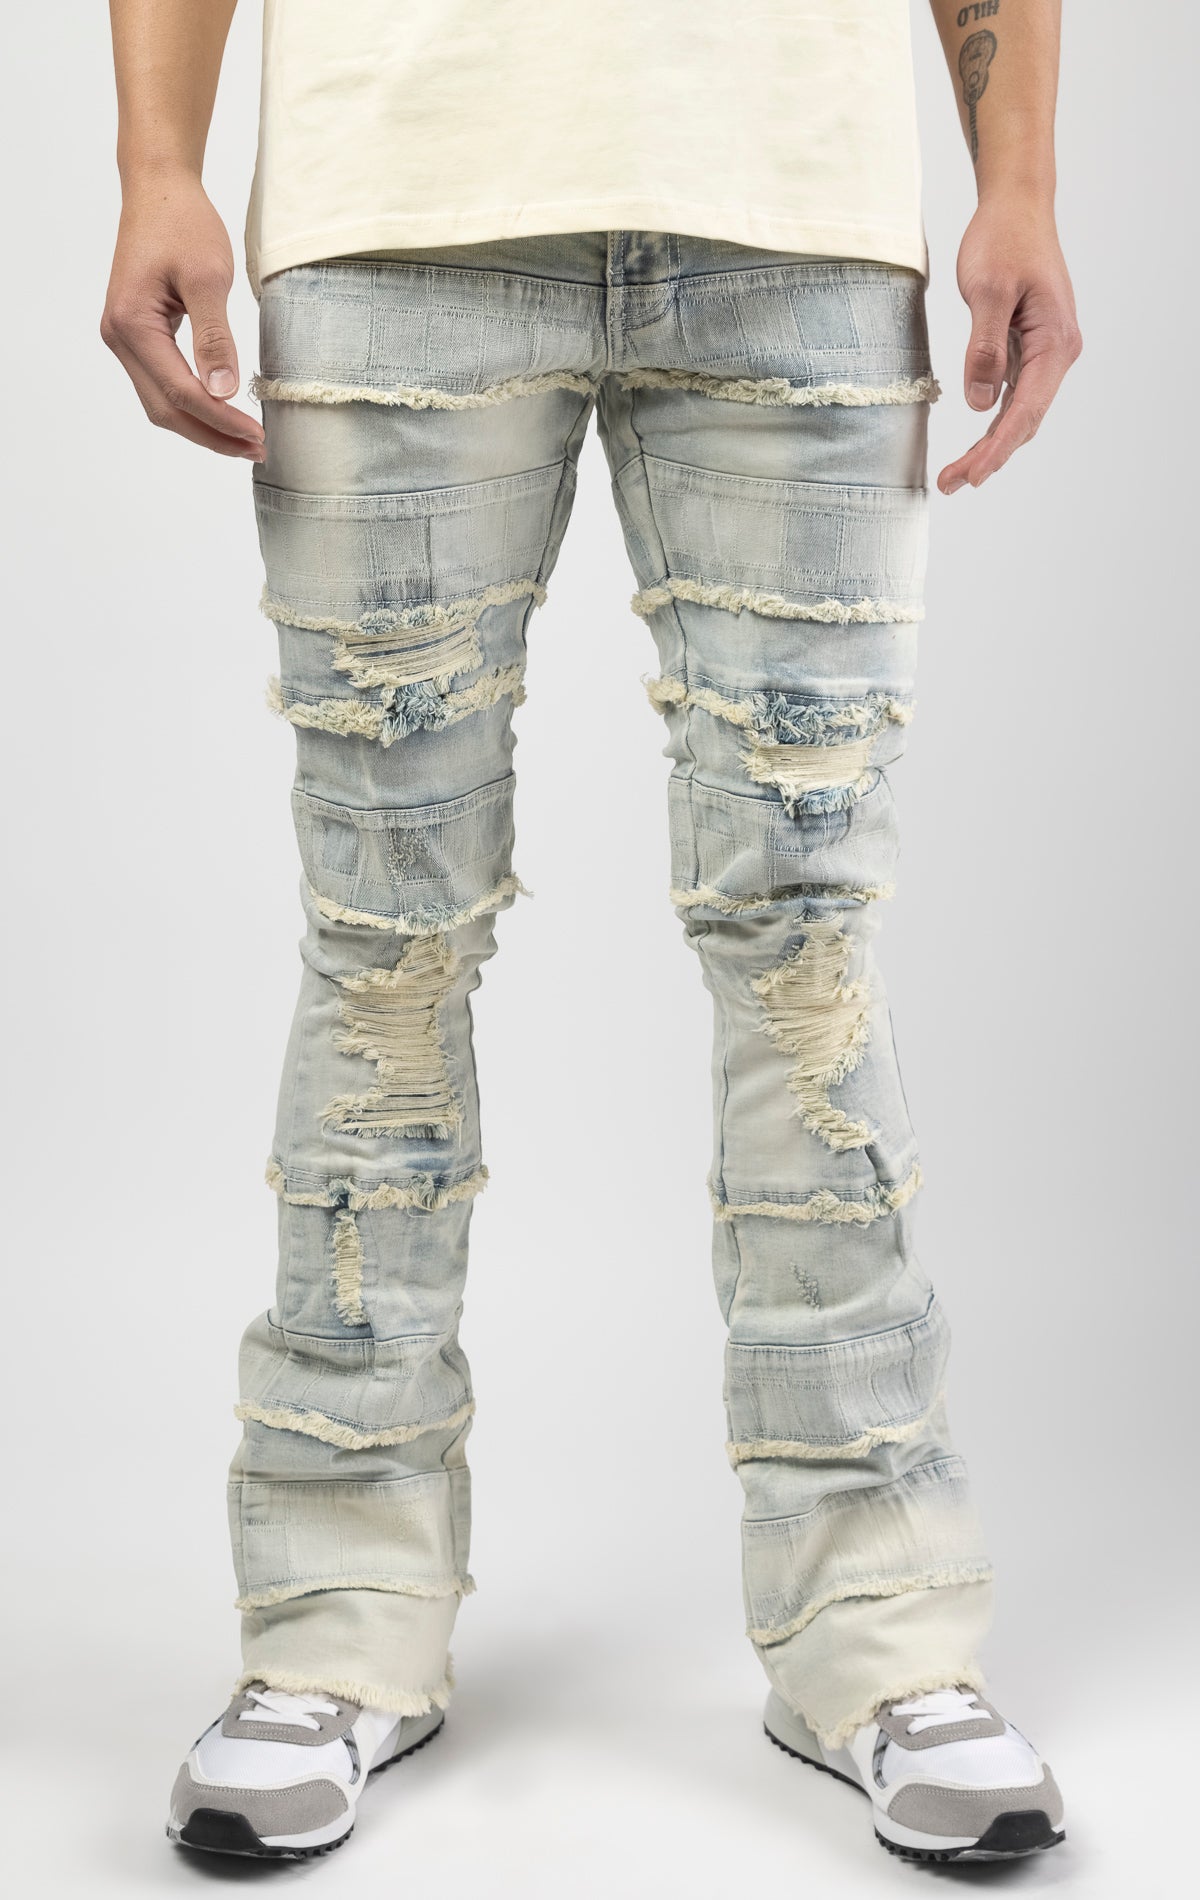 Light wash iconic stacked jeans crafted from high-quality, durable denim fabric consisting of 98% cotton and 2% spandex with a semi flare silhouette and a length of 35"-37". Featuring a distinctive ripped and repair design with pocket patches and a multi-tone dye throughout, these urban-inspired pants are true to size